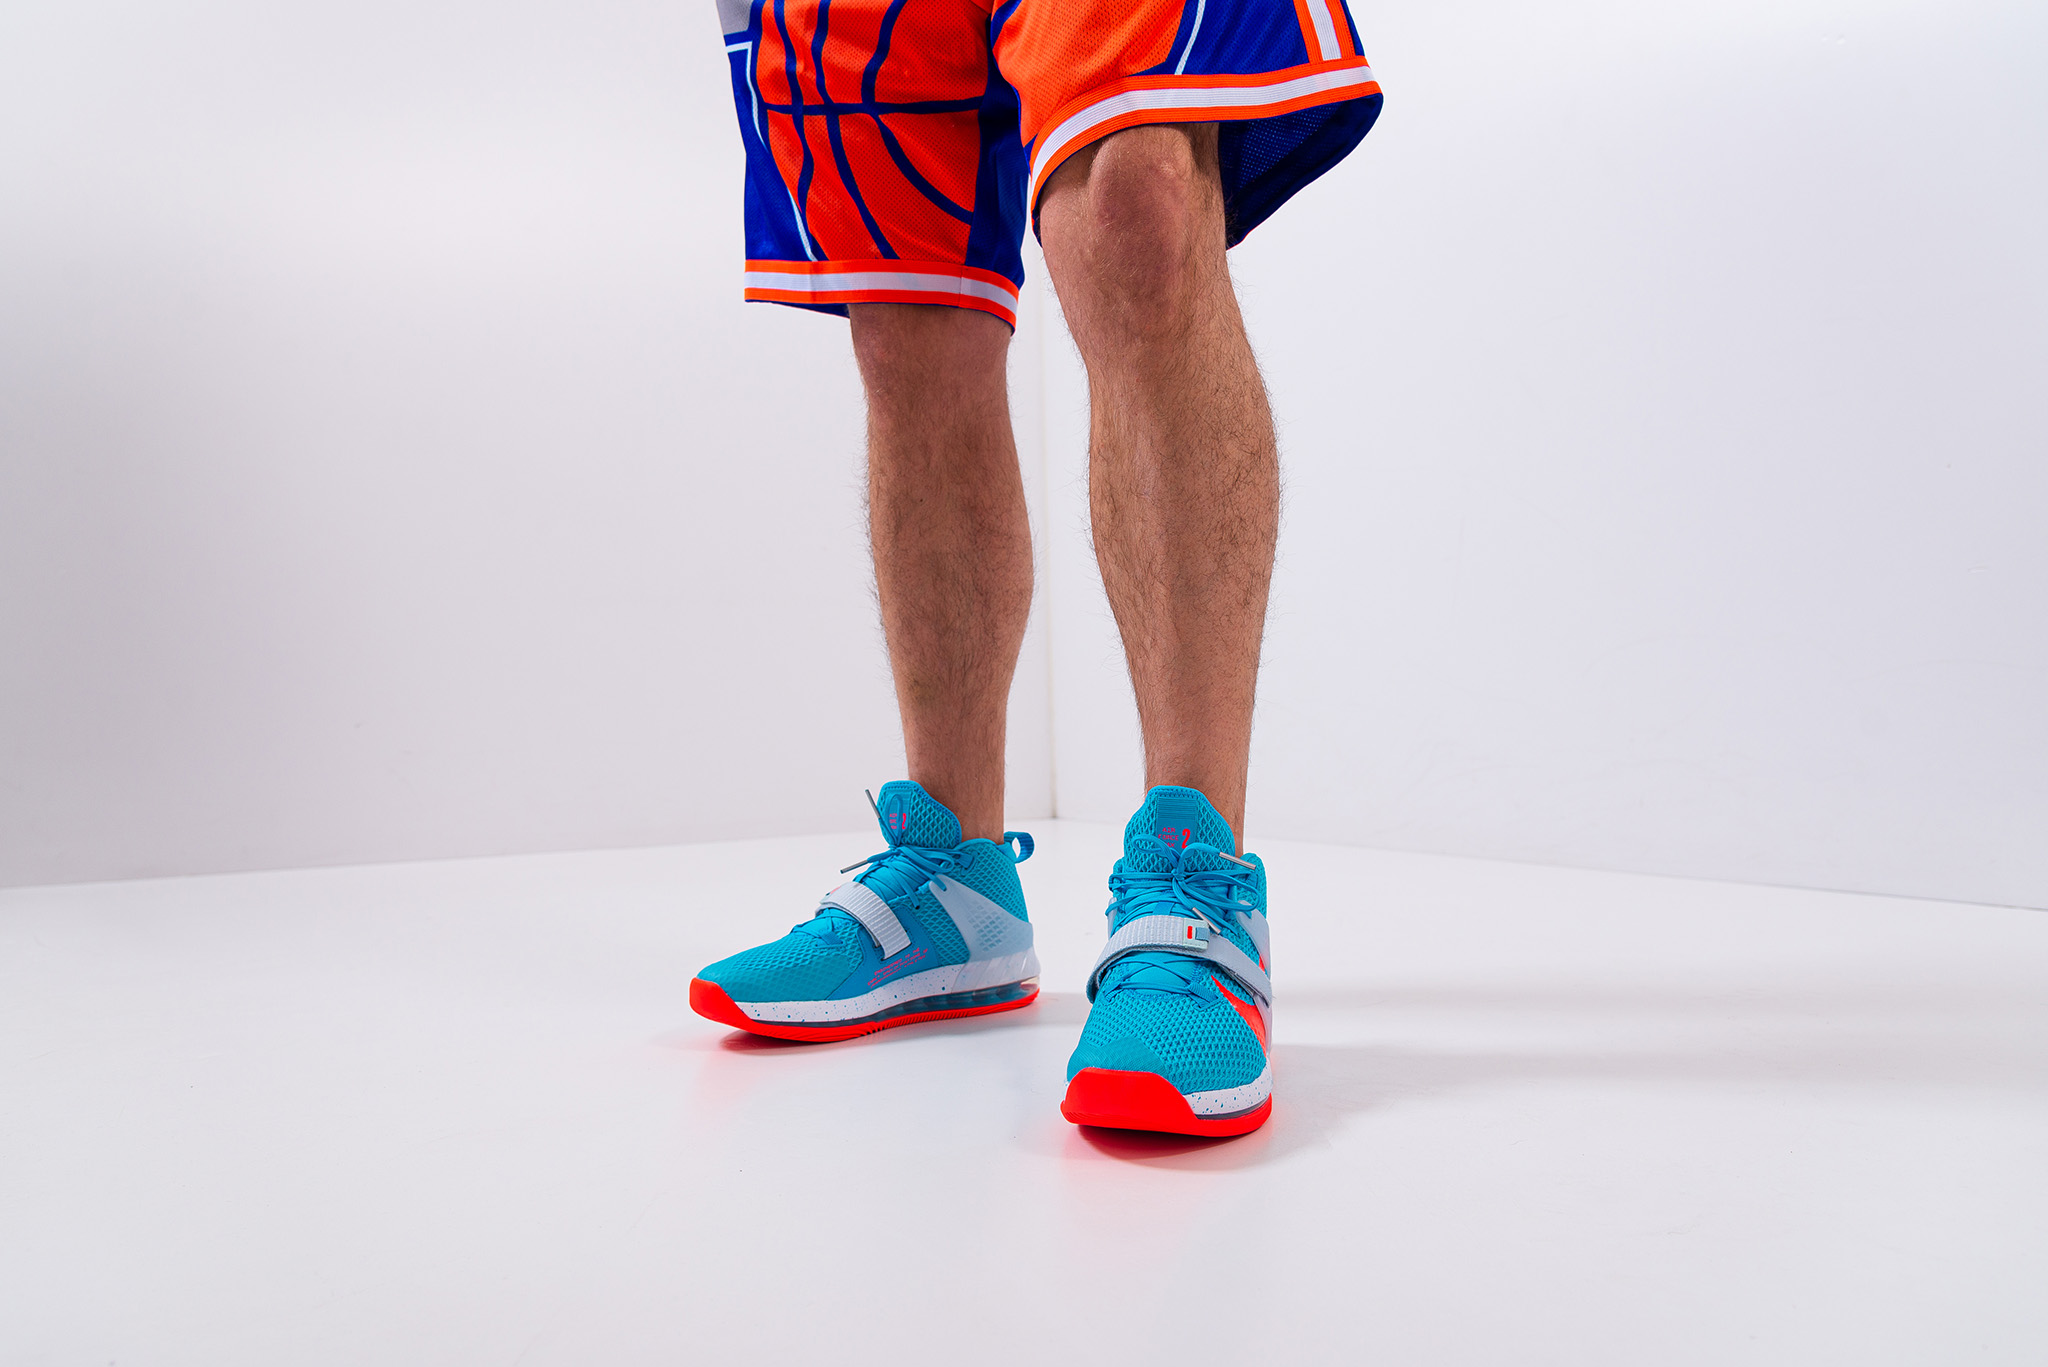 Looking for new basketball shoes? We will help you to choose!